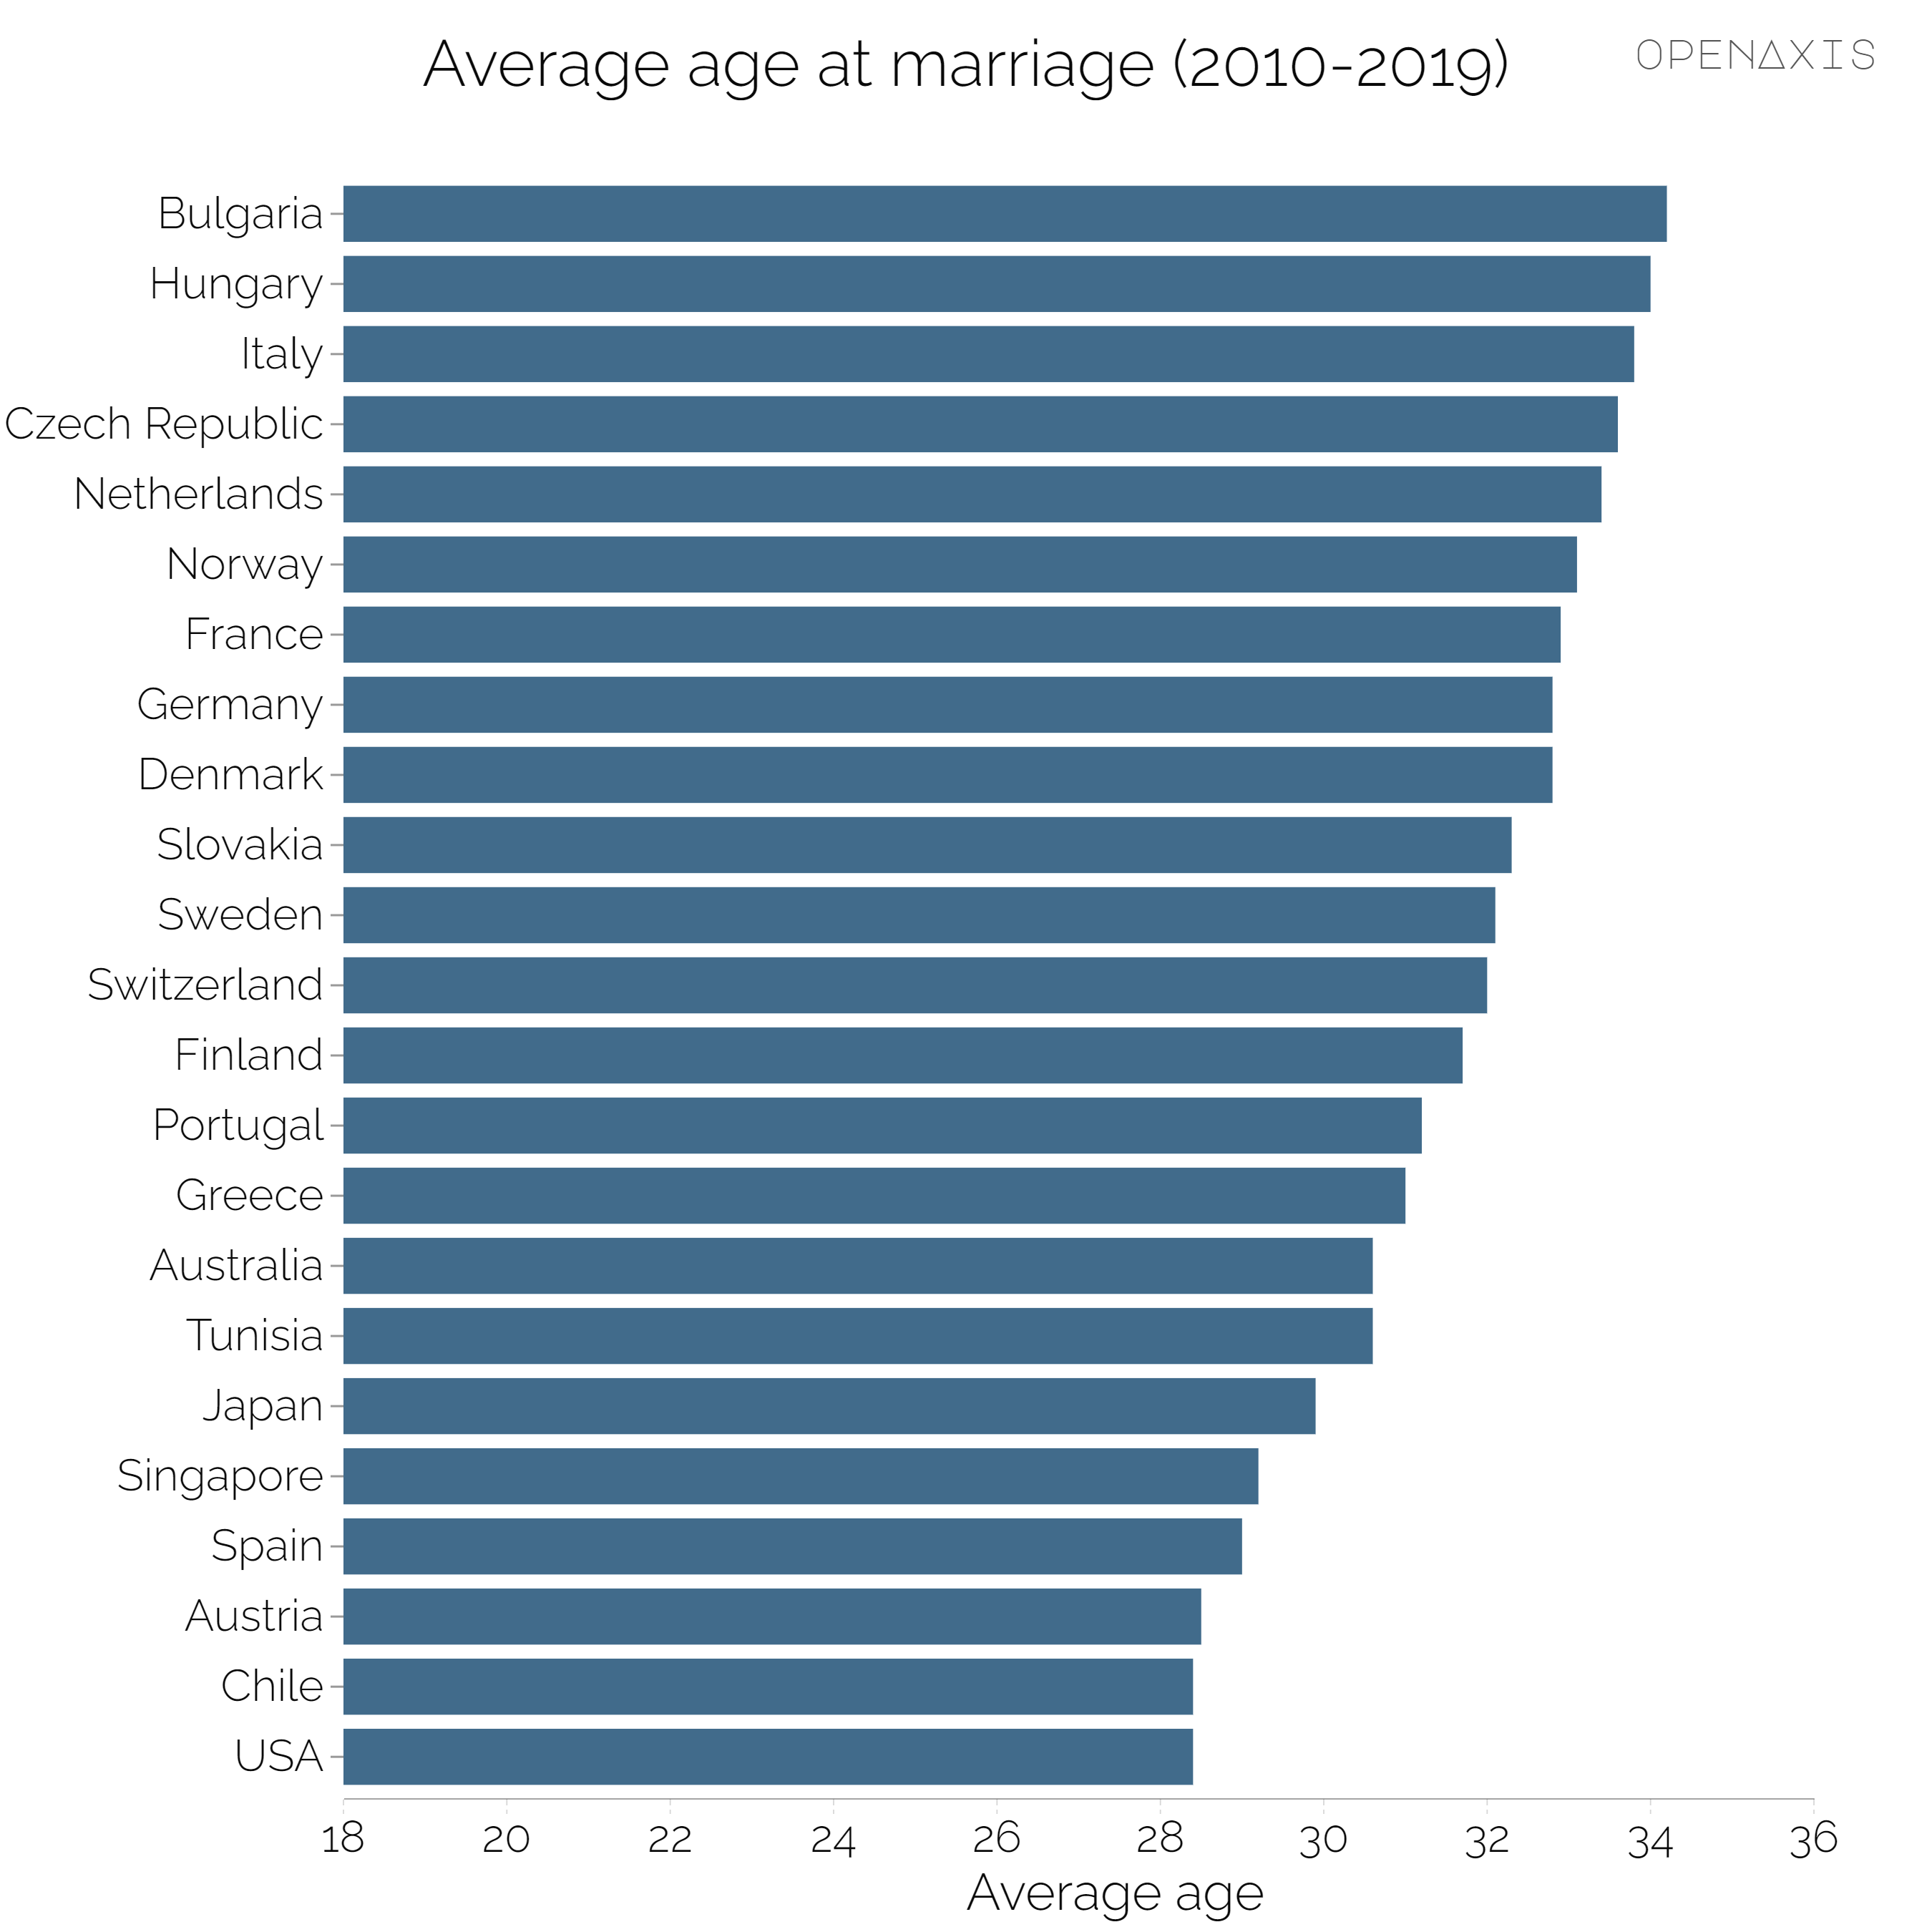 "Average age at marriage (2010-2019)"